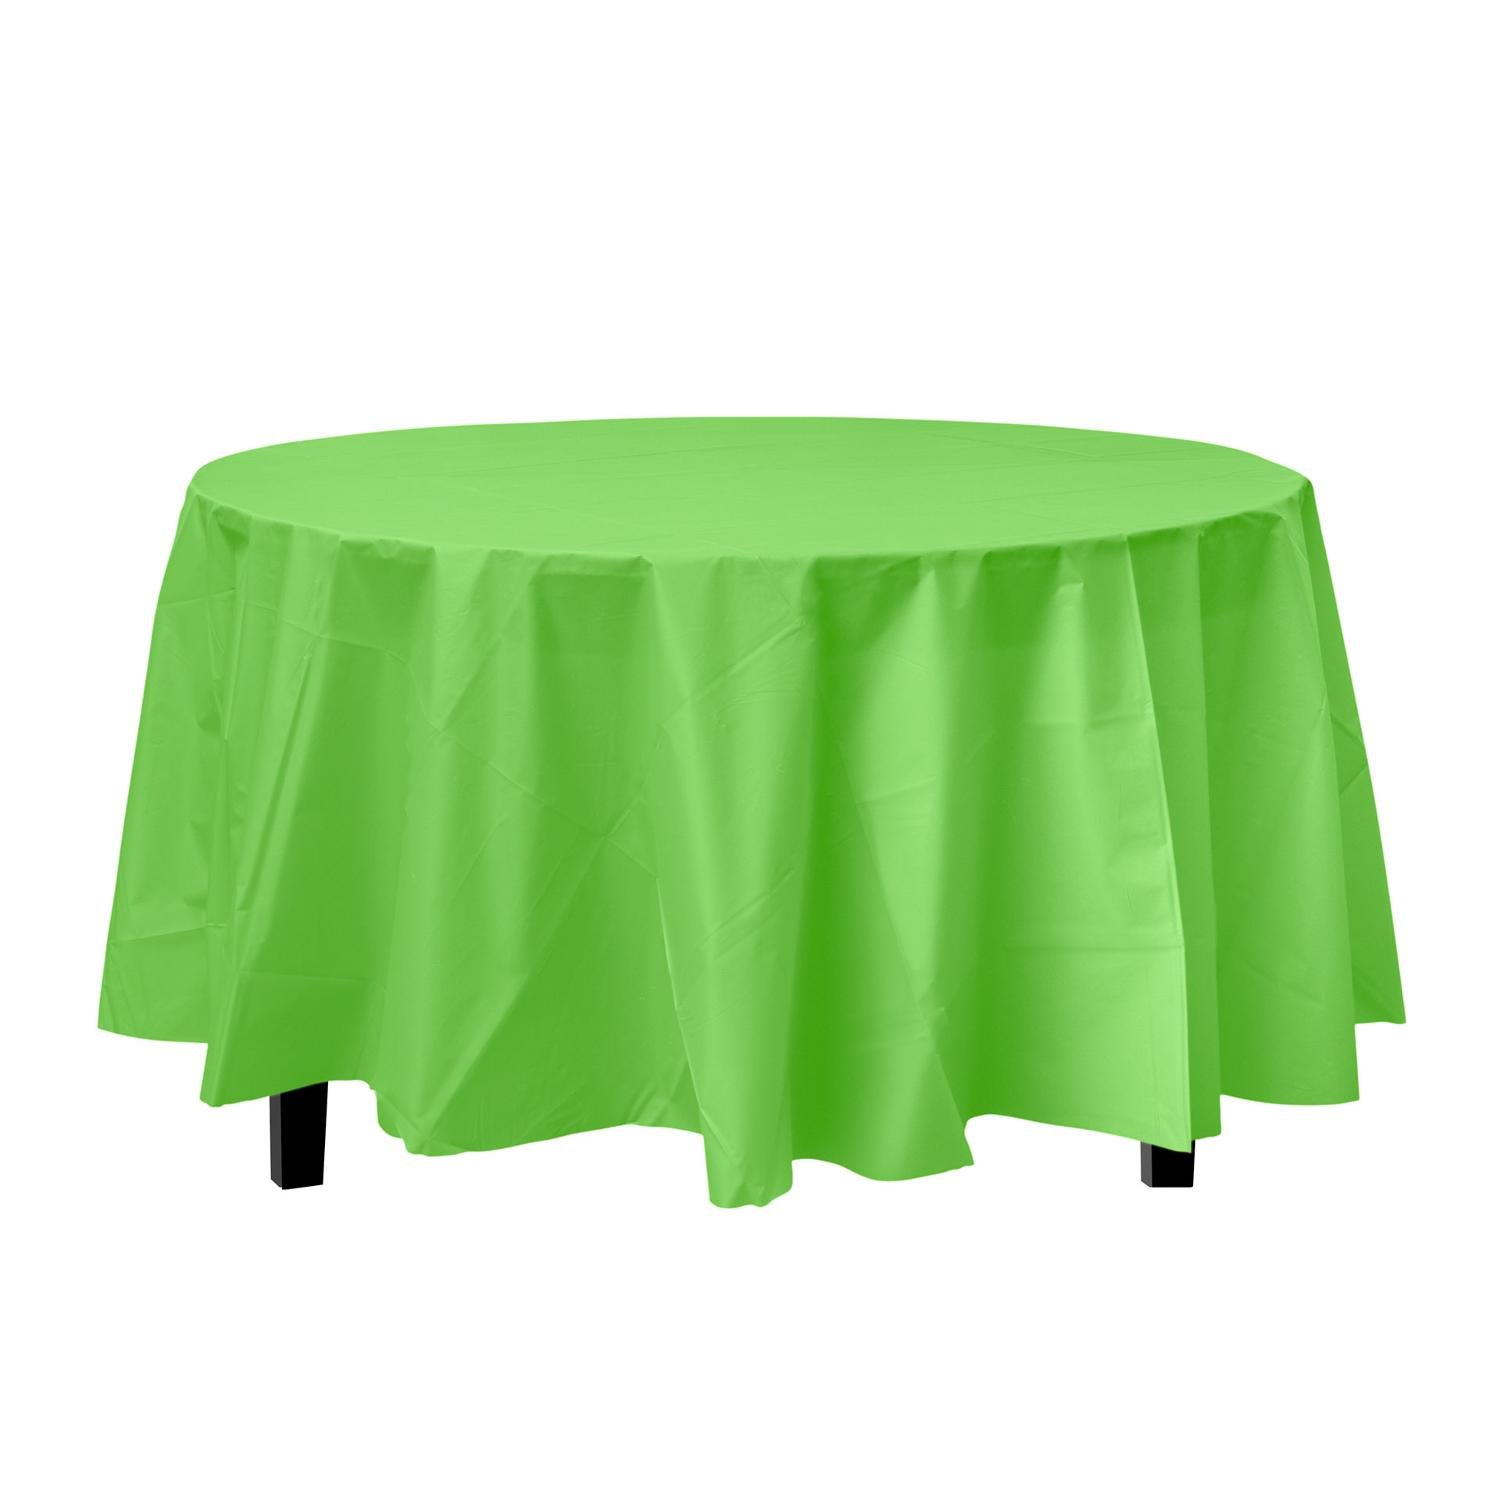 Lime Green Round plastic table cover (Case of 48)